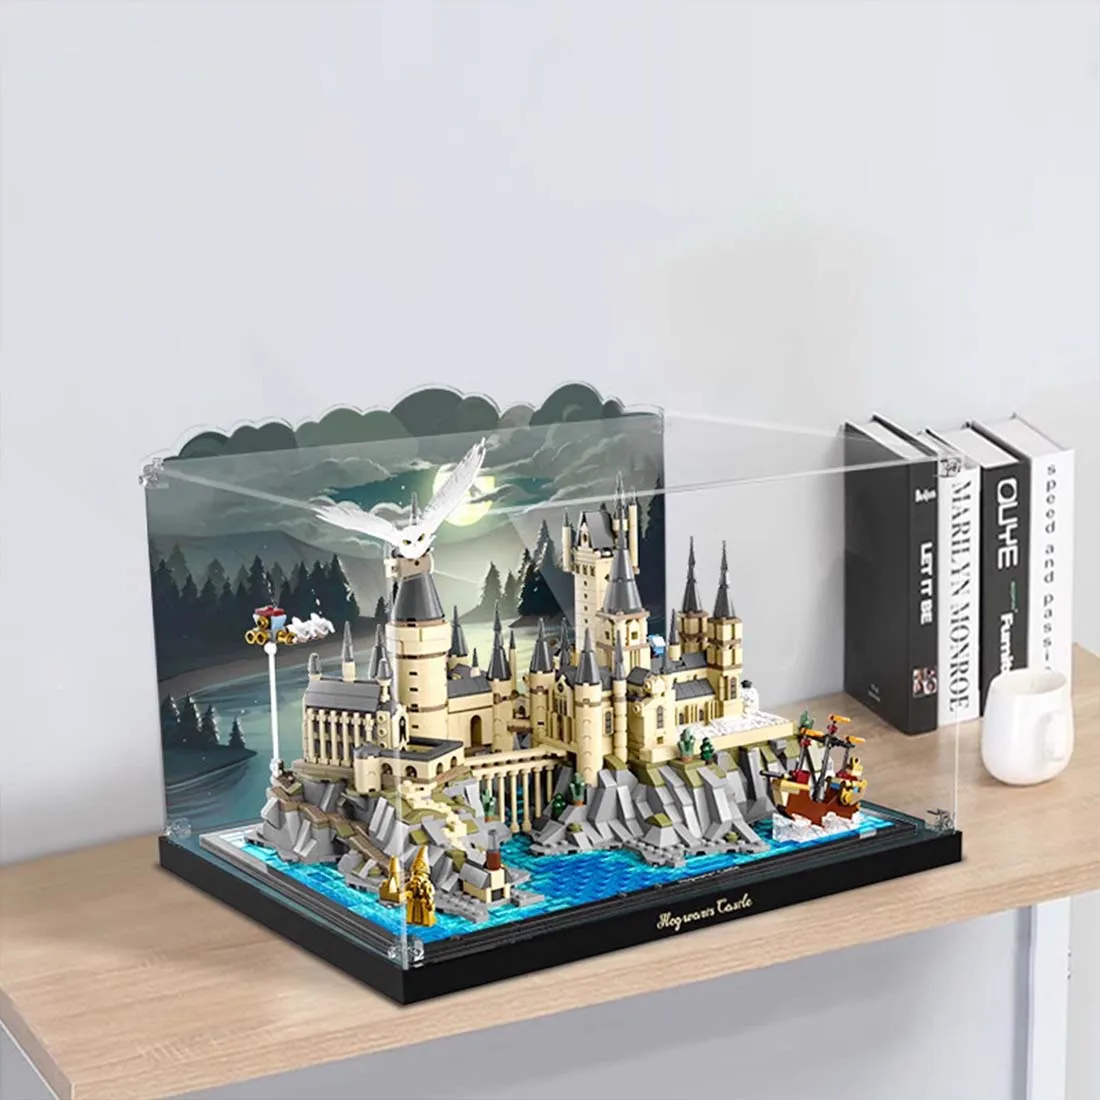 

3mm Acrylic Display Case for Lego 76419 Castle and Grounds Building Blocks Patterned Display Case NO Bricks Set